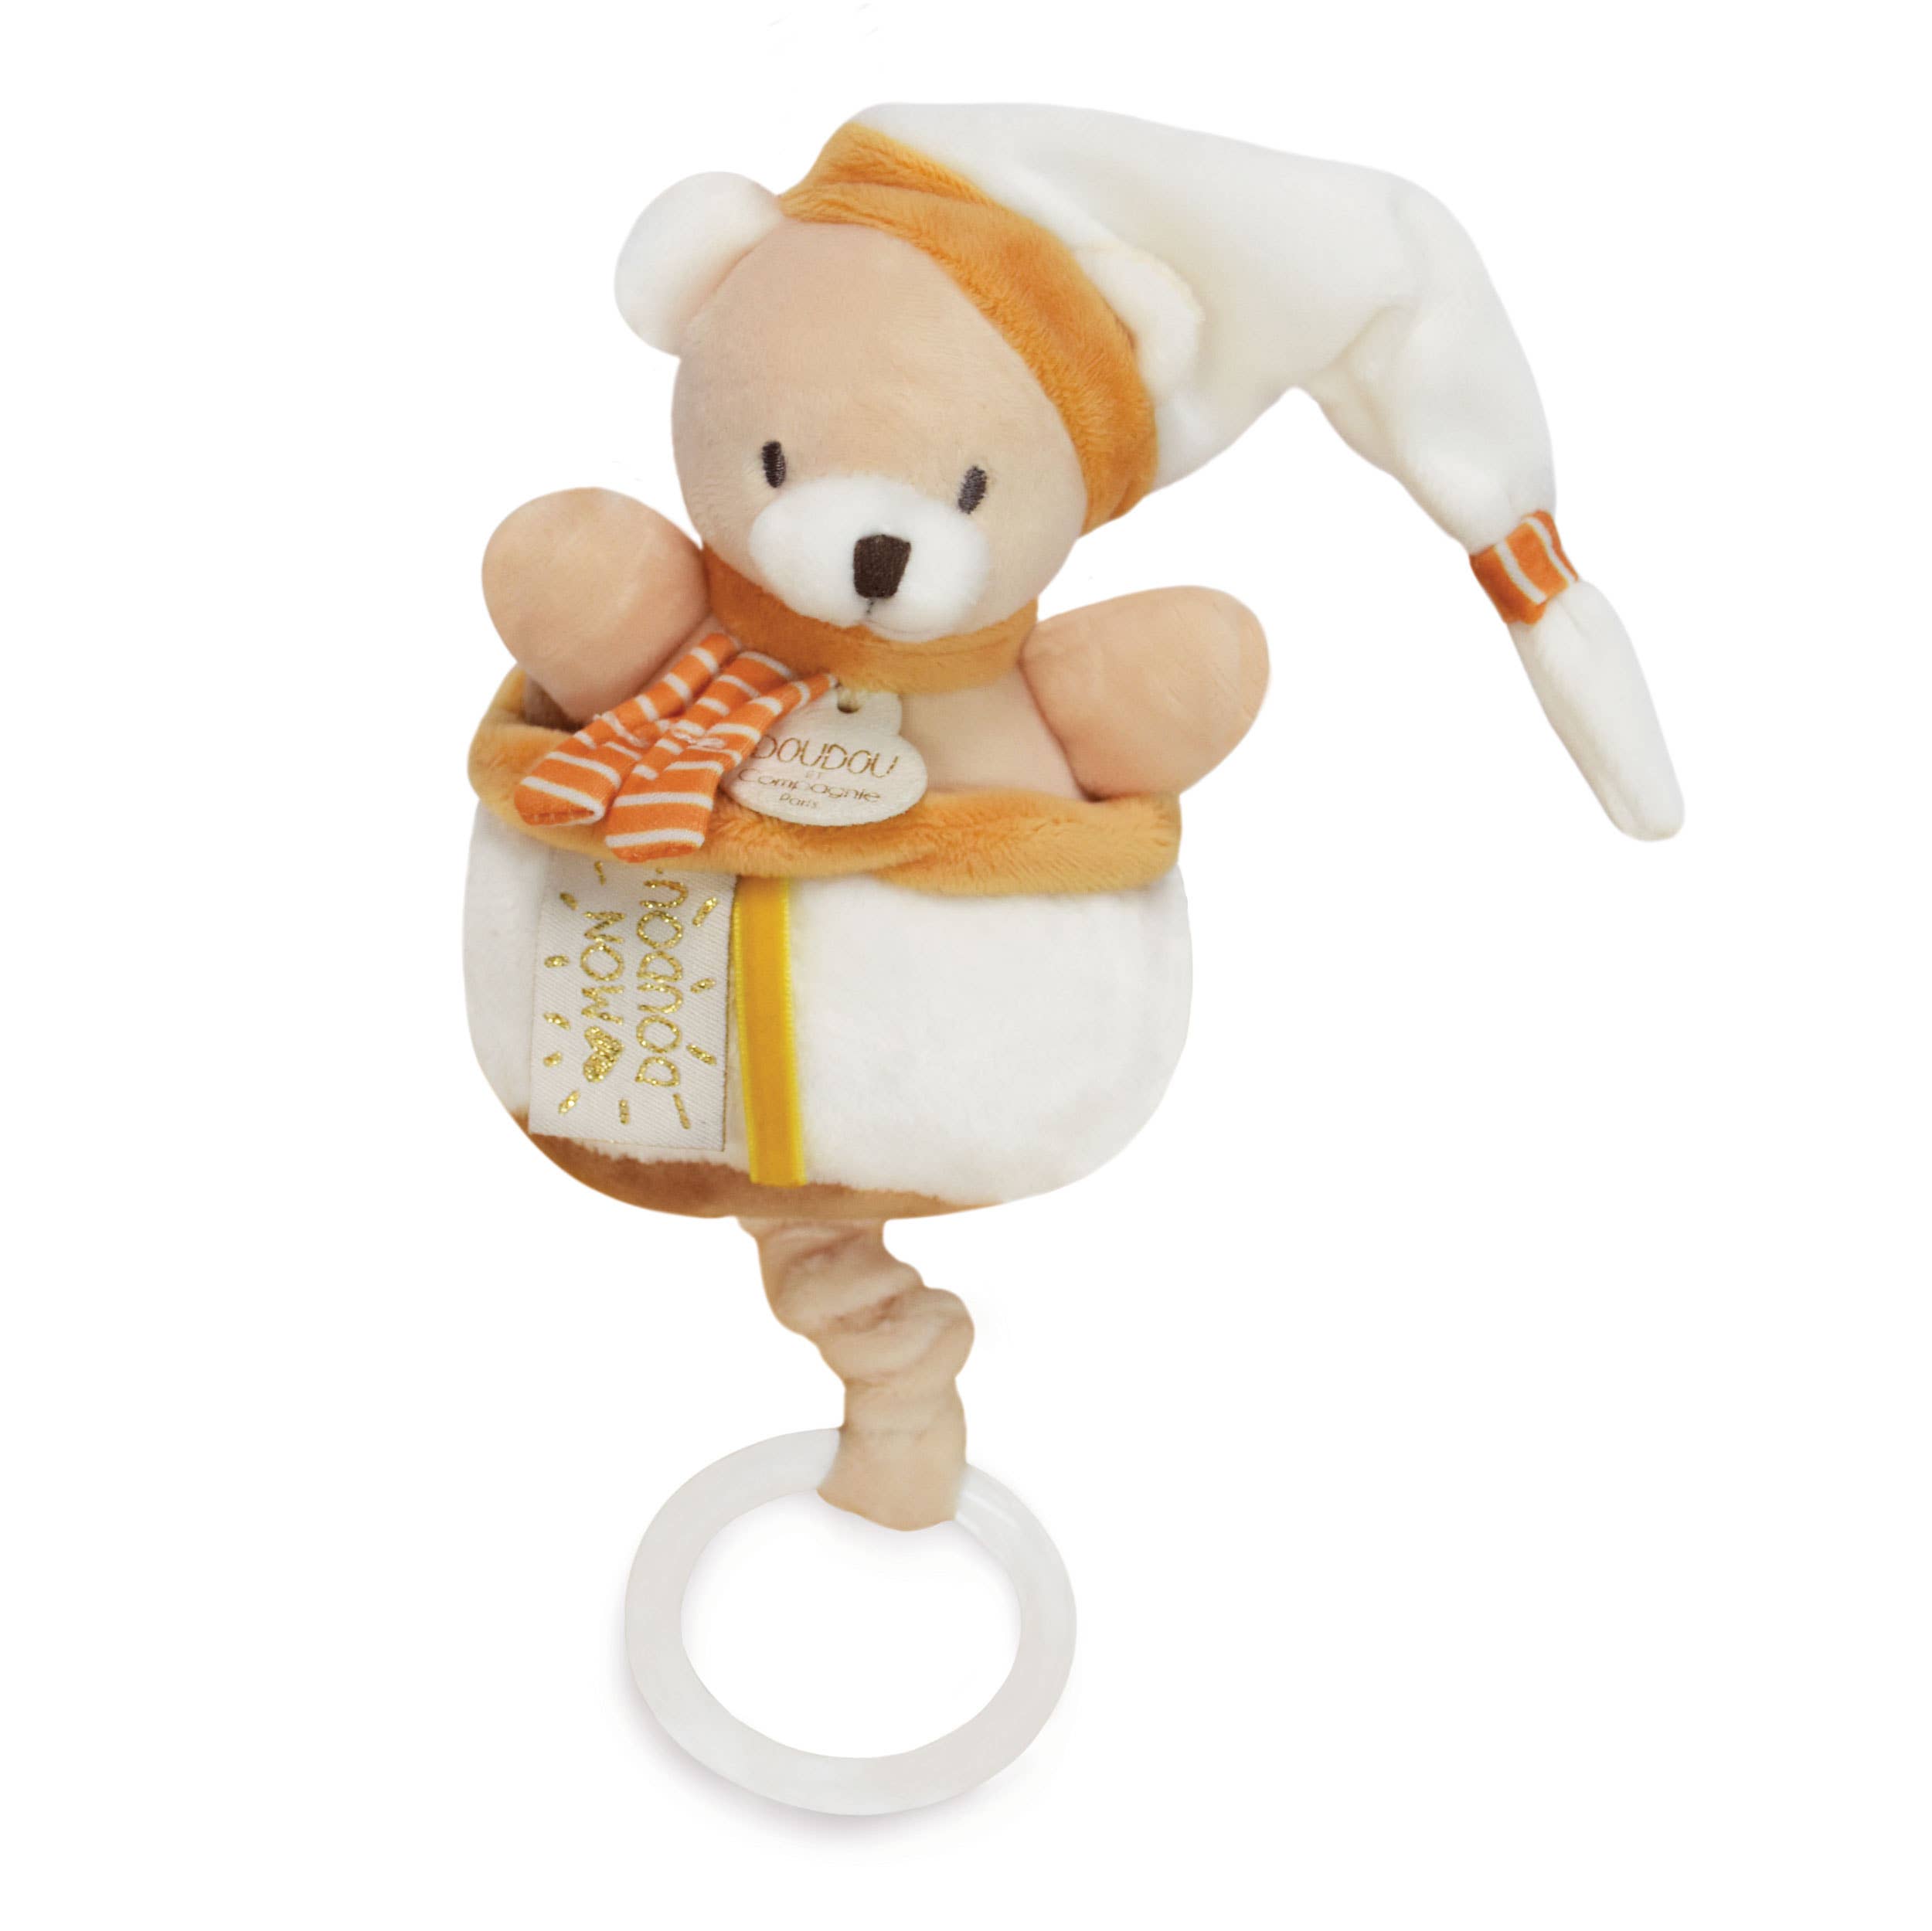 Doudou et Compagnie Musical Plush Pull Toy in White and Orange